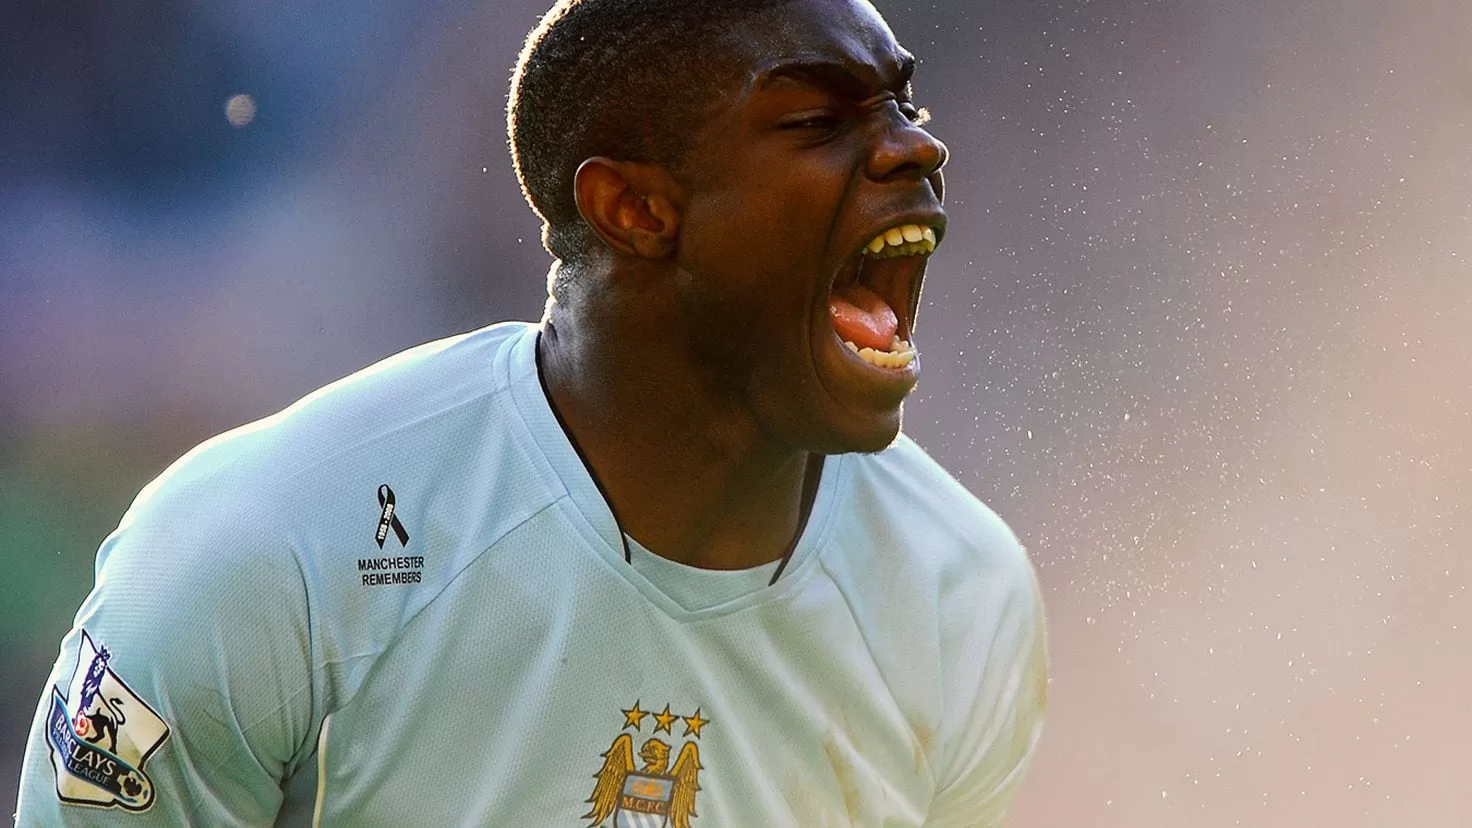 Micah Richards, on the Olympic Village parties: There was a room full of condoms
